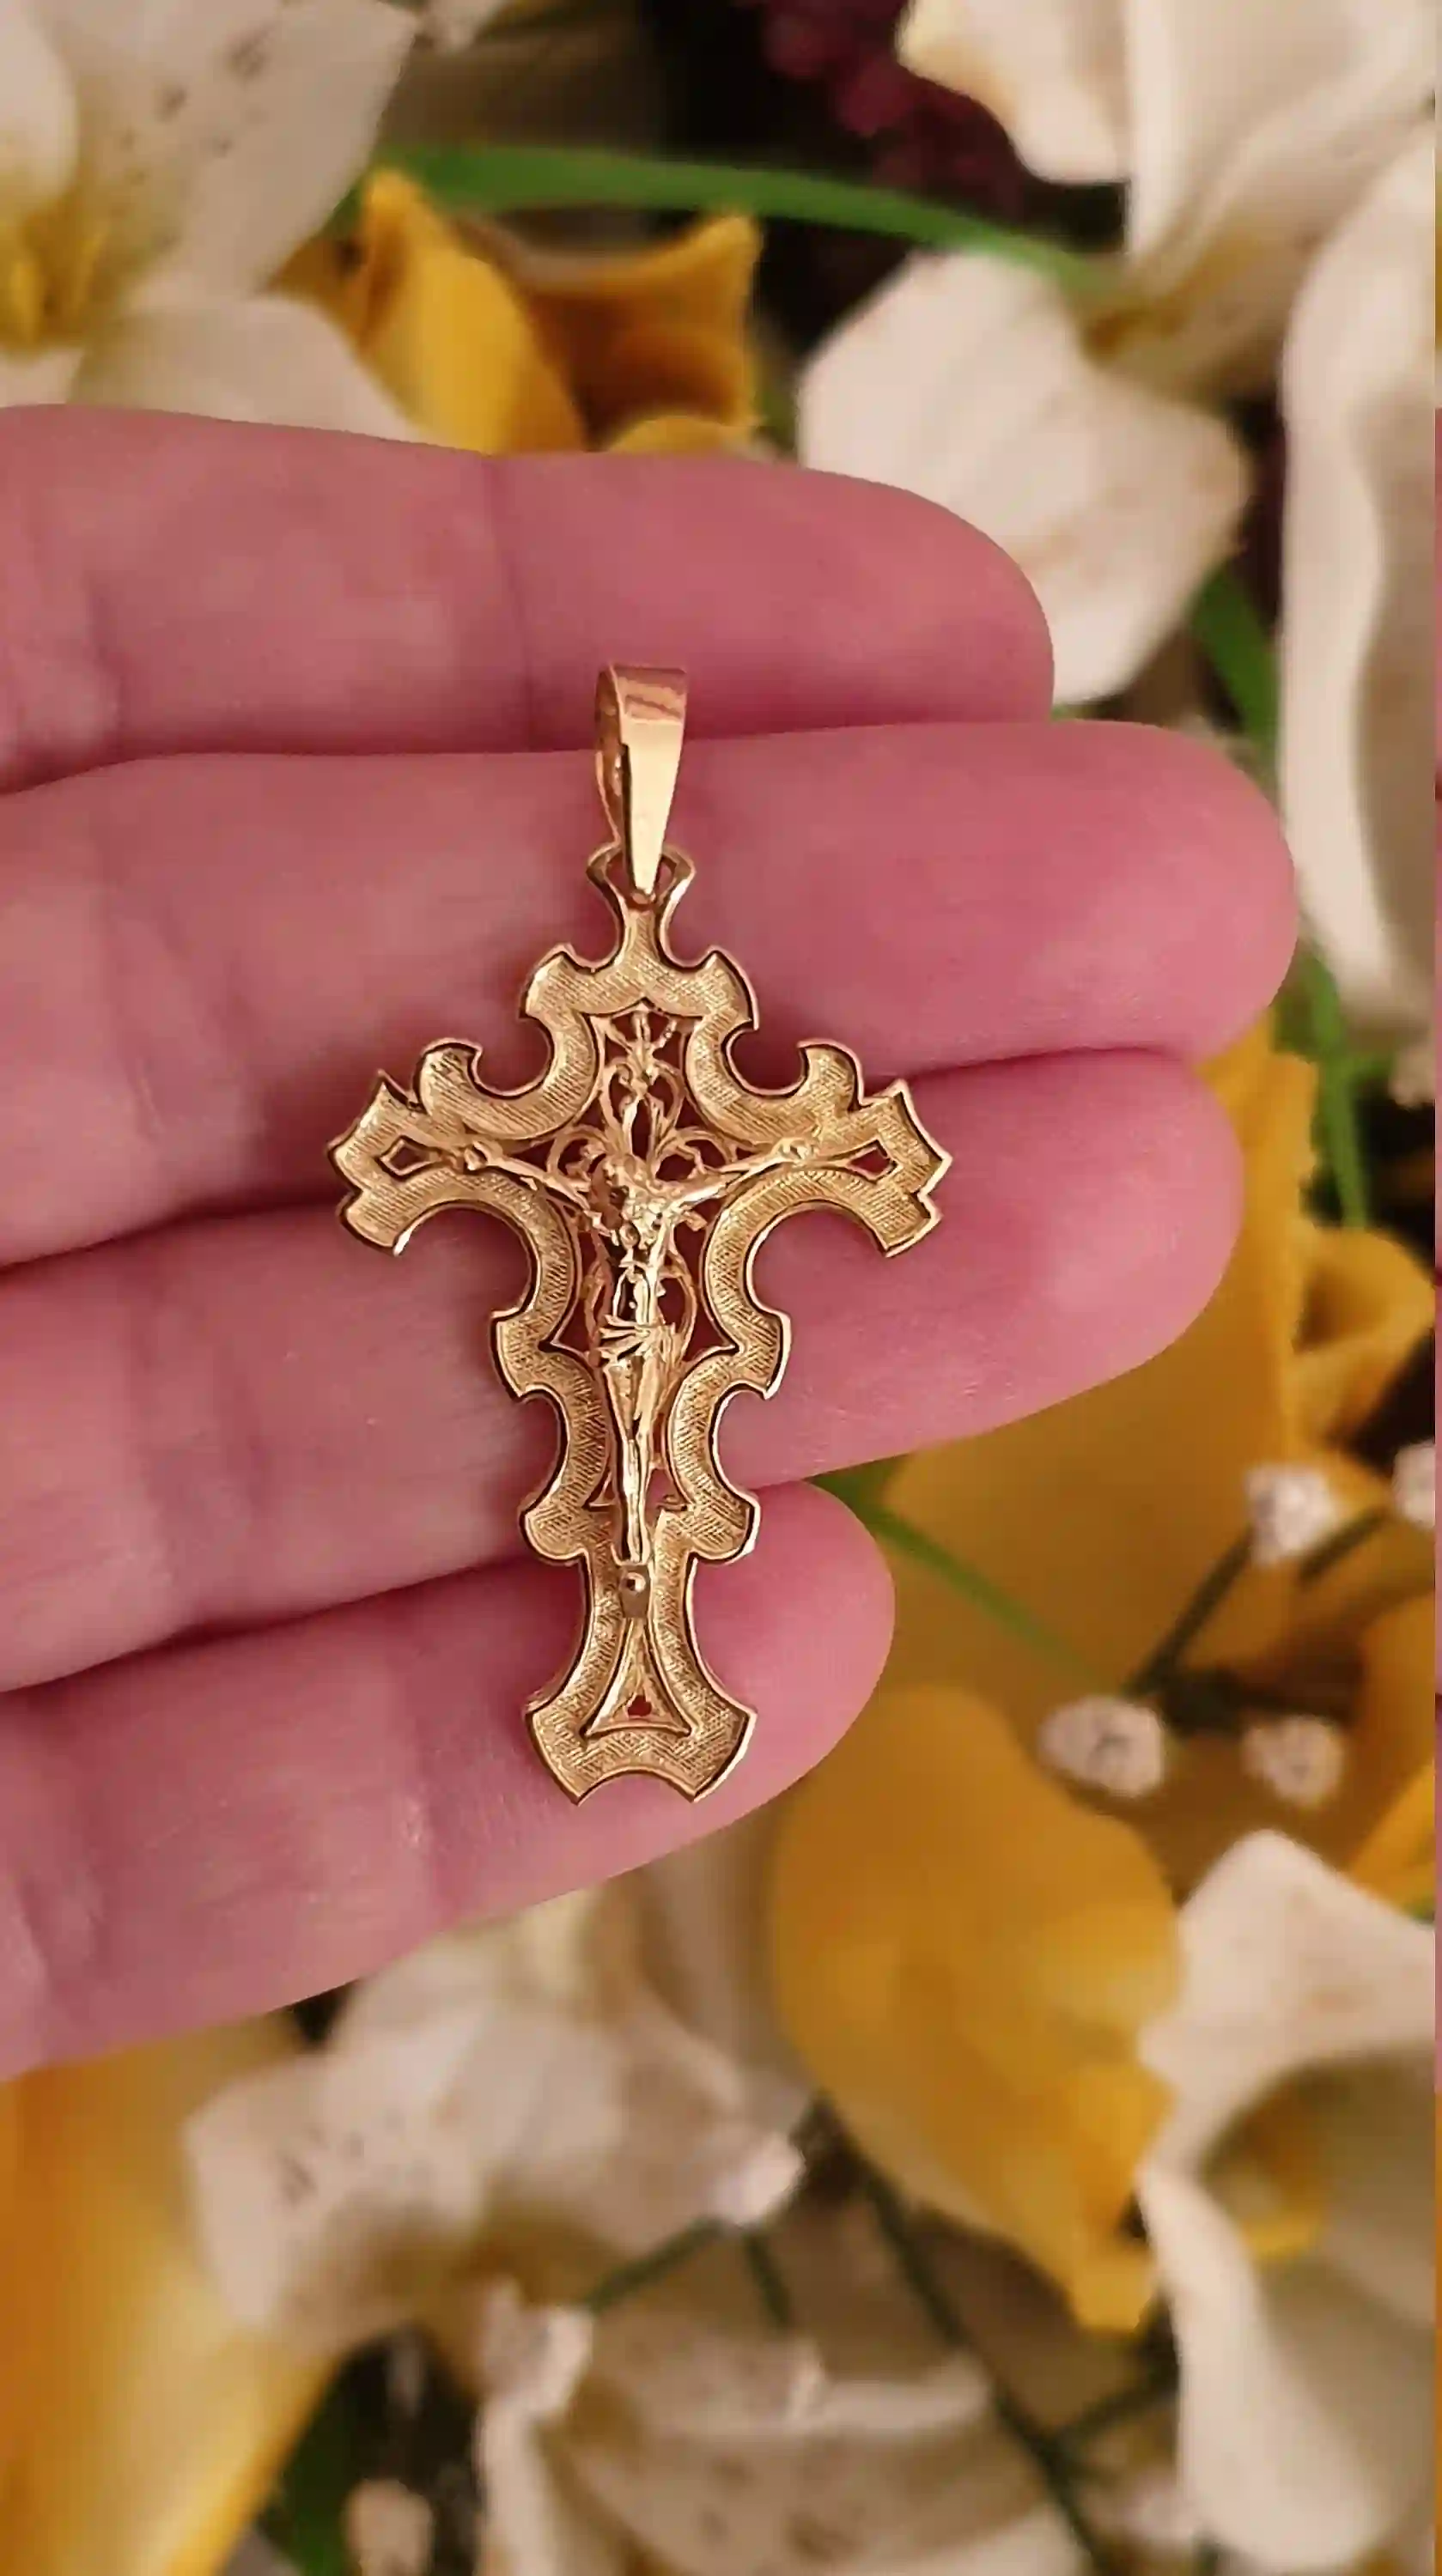 18kt SOLID GOLD Cross Pendant Woman/Crucifix Jewelry Christian Gifts for Women/HANDMADE Byzantine Jewellery Religious Cross Jesus Gold Charm 